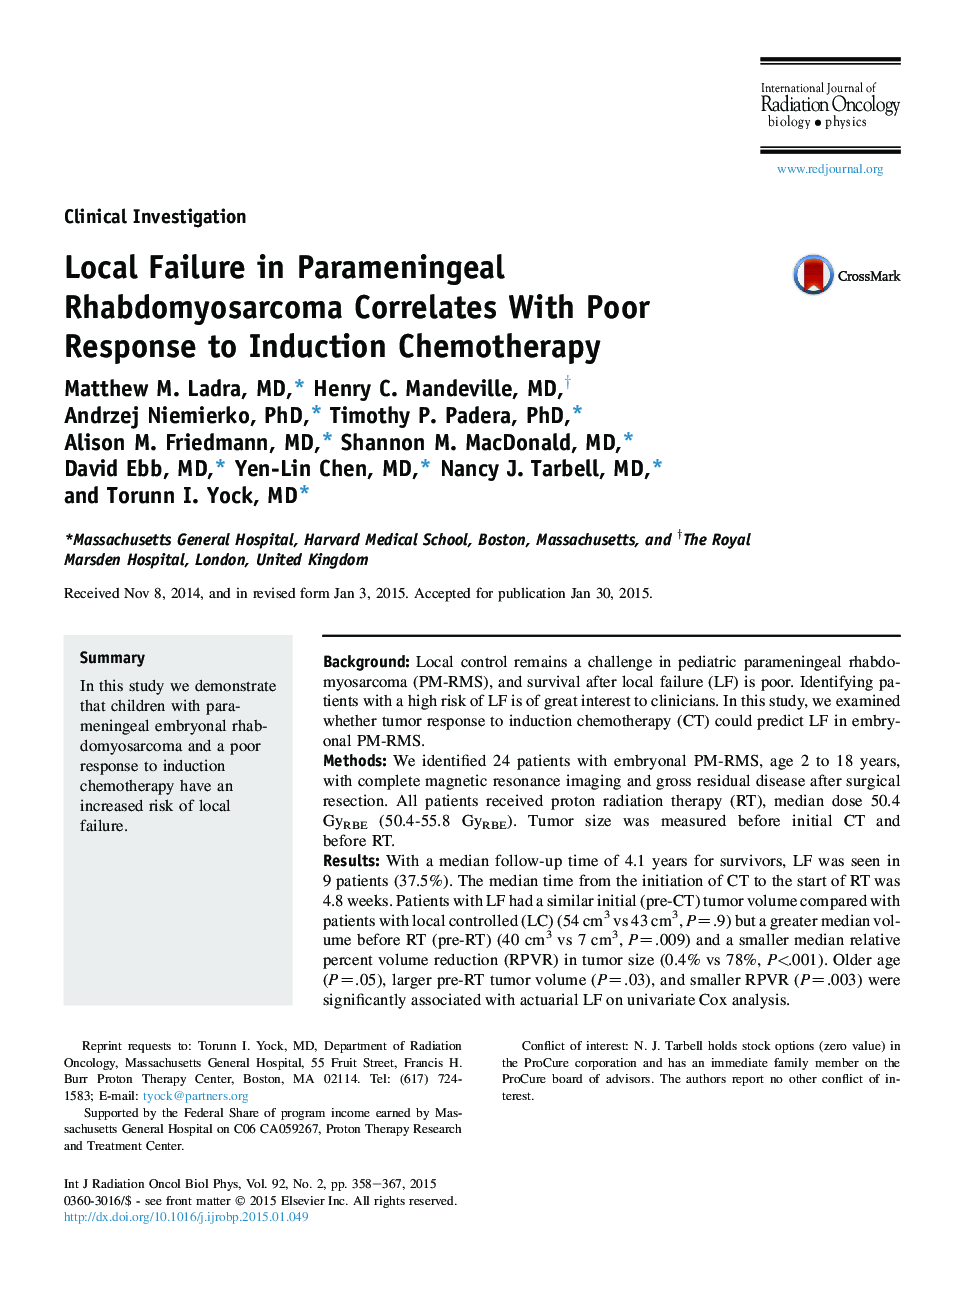 Local Failure in Parameningeal Rhabdomyosarcoma Correlates With Poor Response to Induction Chemotherapy